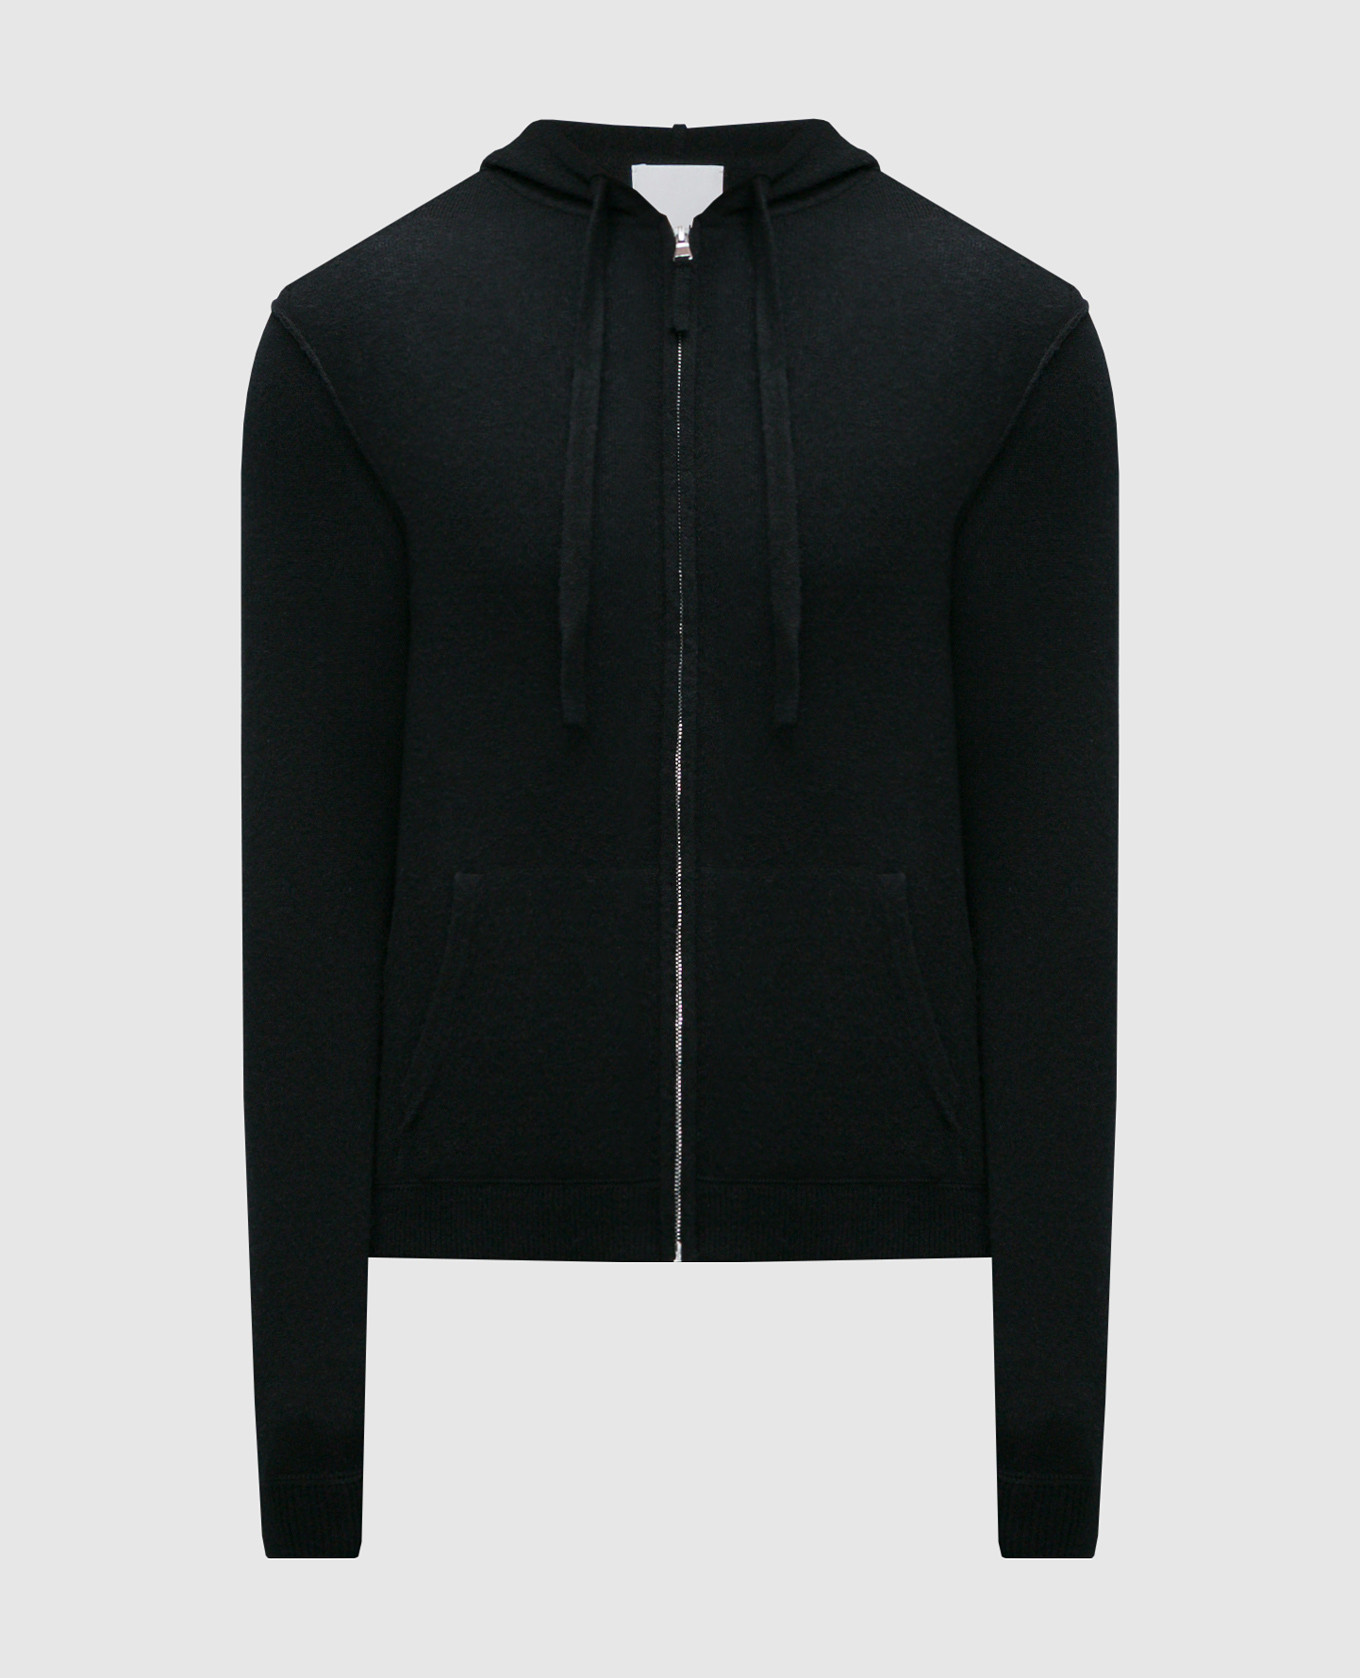 Black cardigan made of wool and cashmere with an inside-out effect